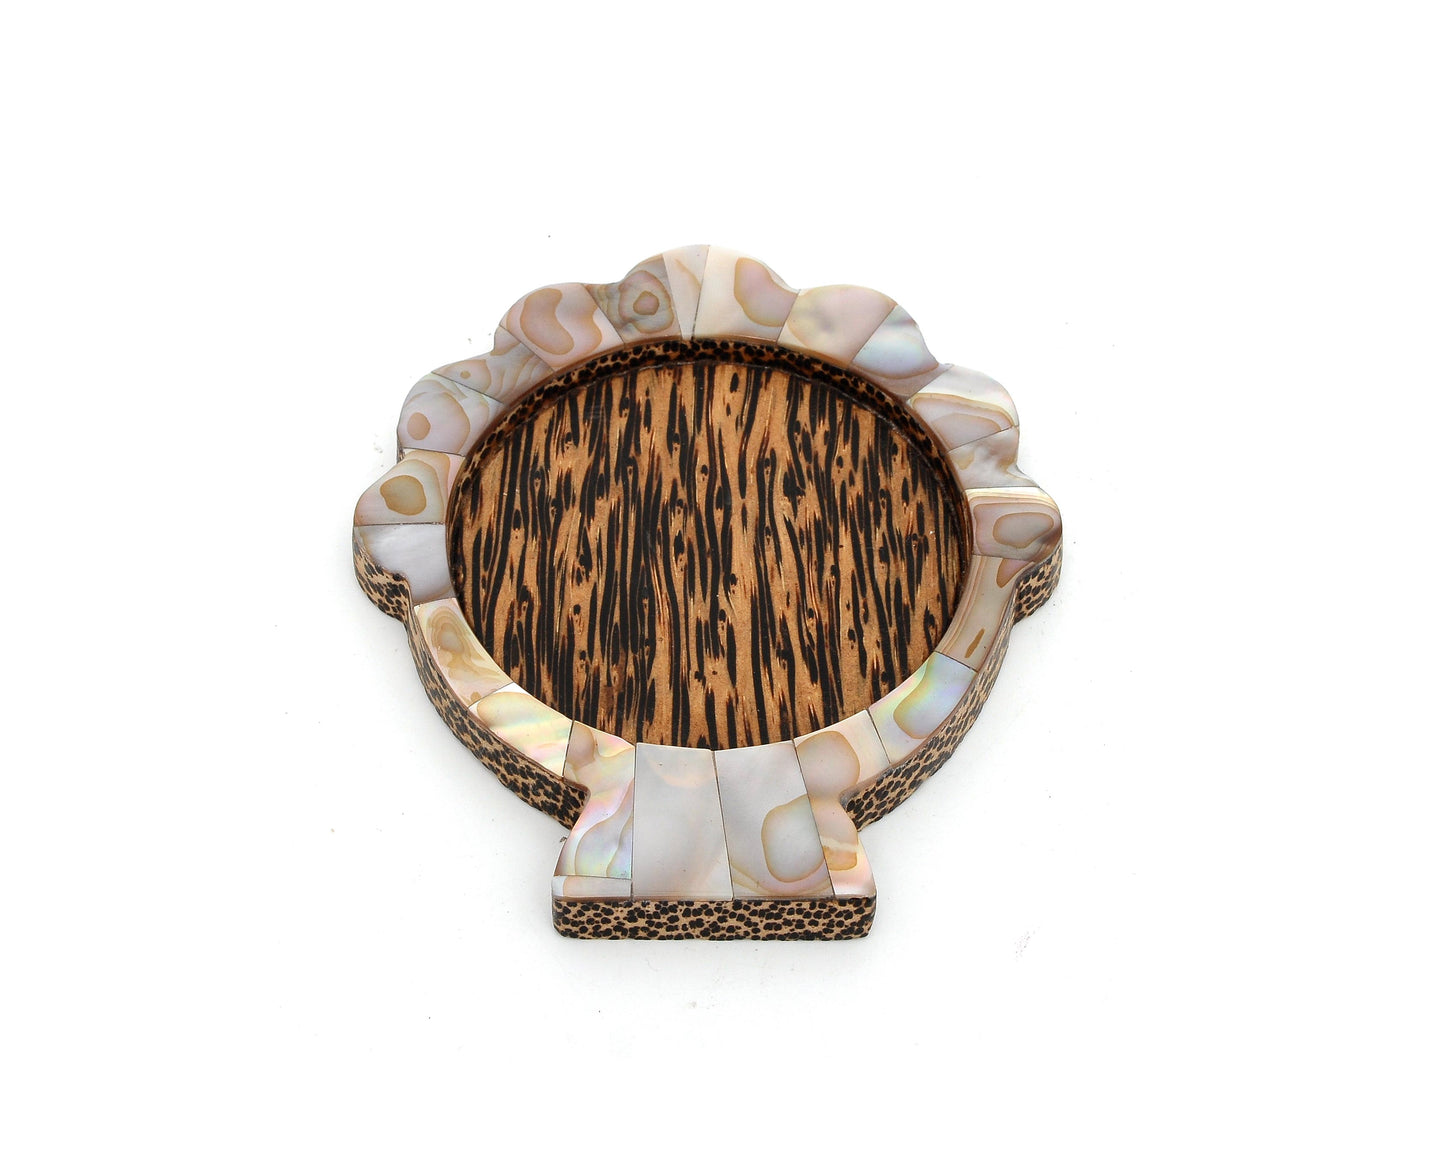 Myanmar Handmade Coconut Wood Clam Coaster With Mother of Pearl Inlay